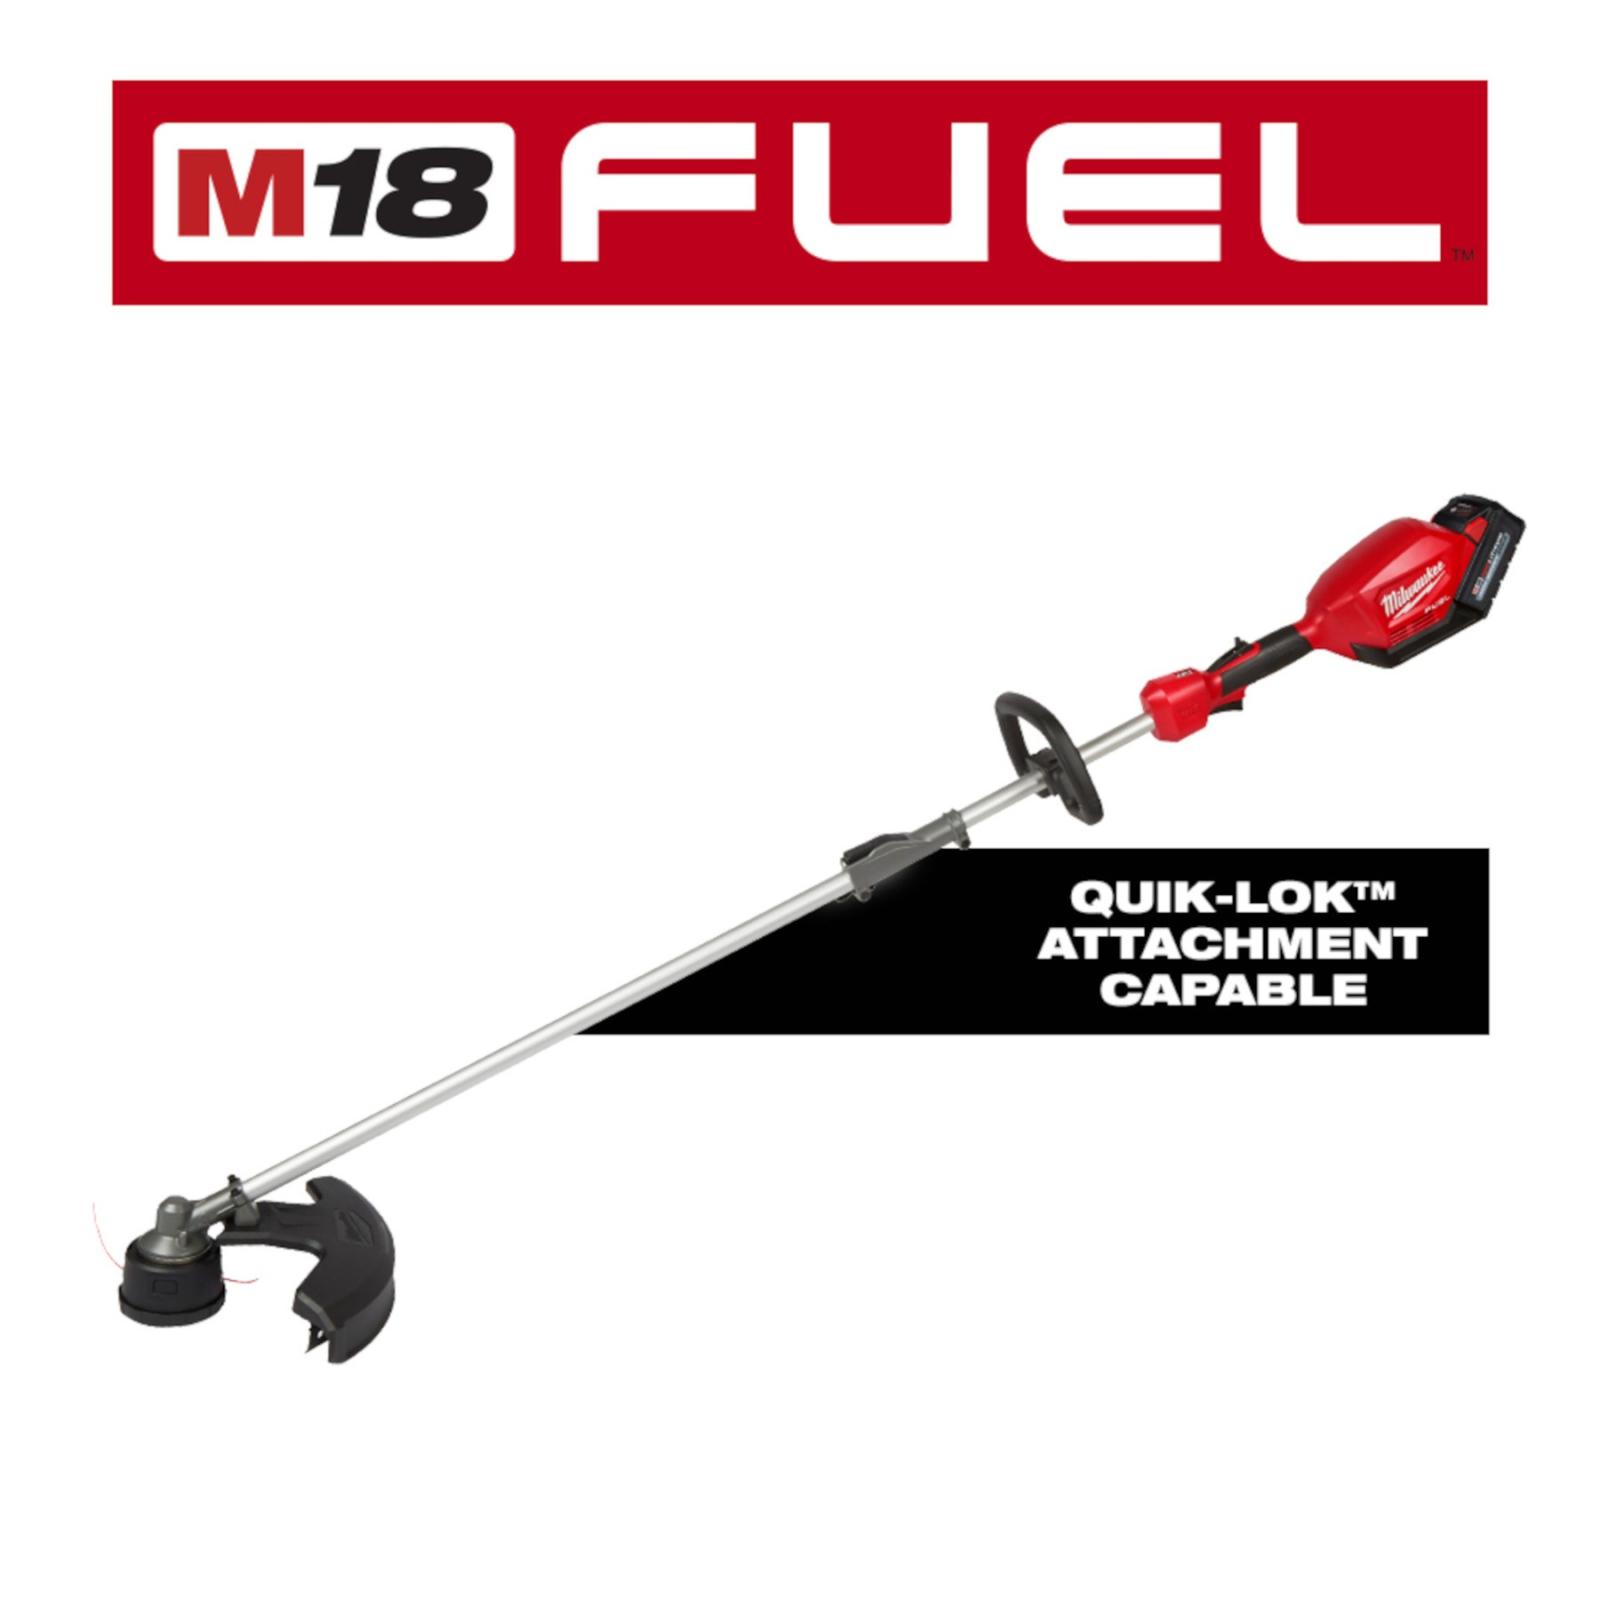 Milwaukee M18 FUEL™ String Trimmer Kit in Use